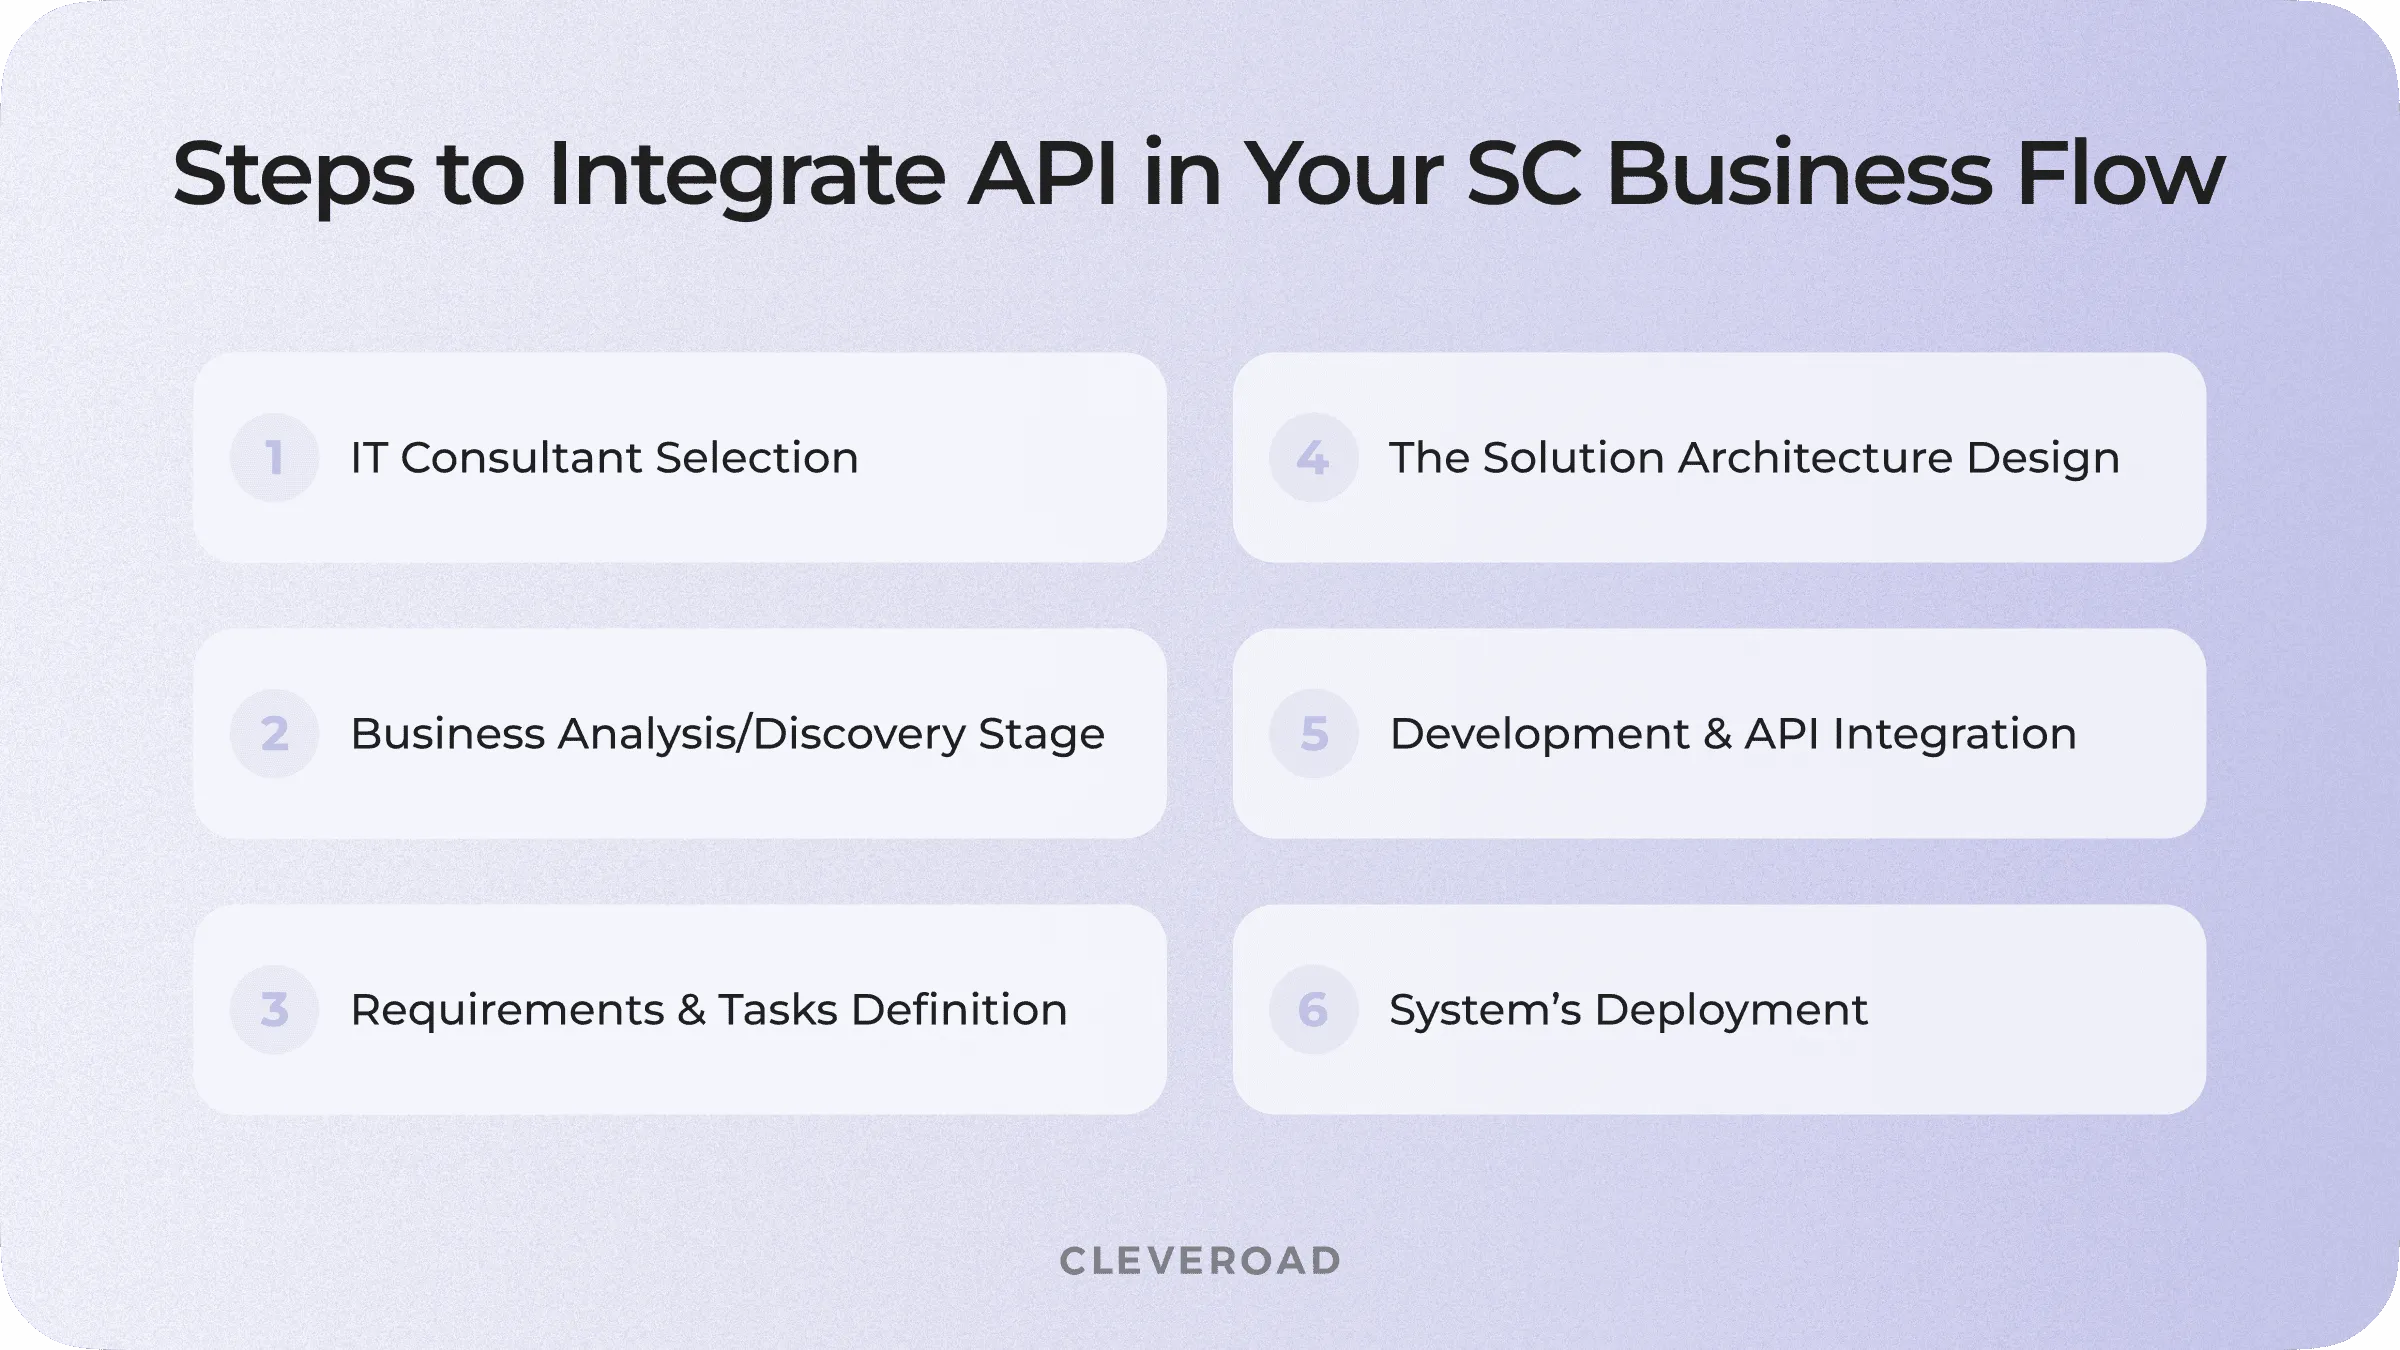 How to integrate API in your SC business flow through the software?